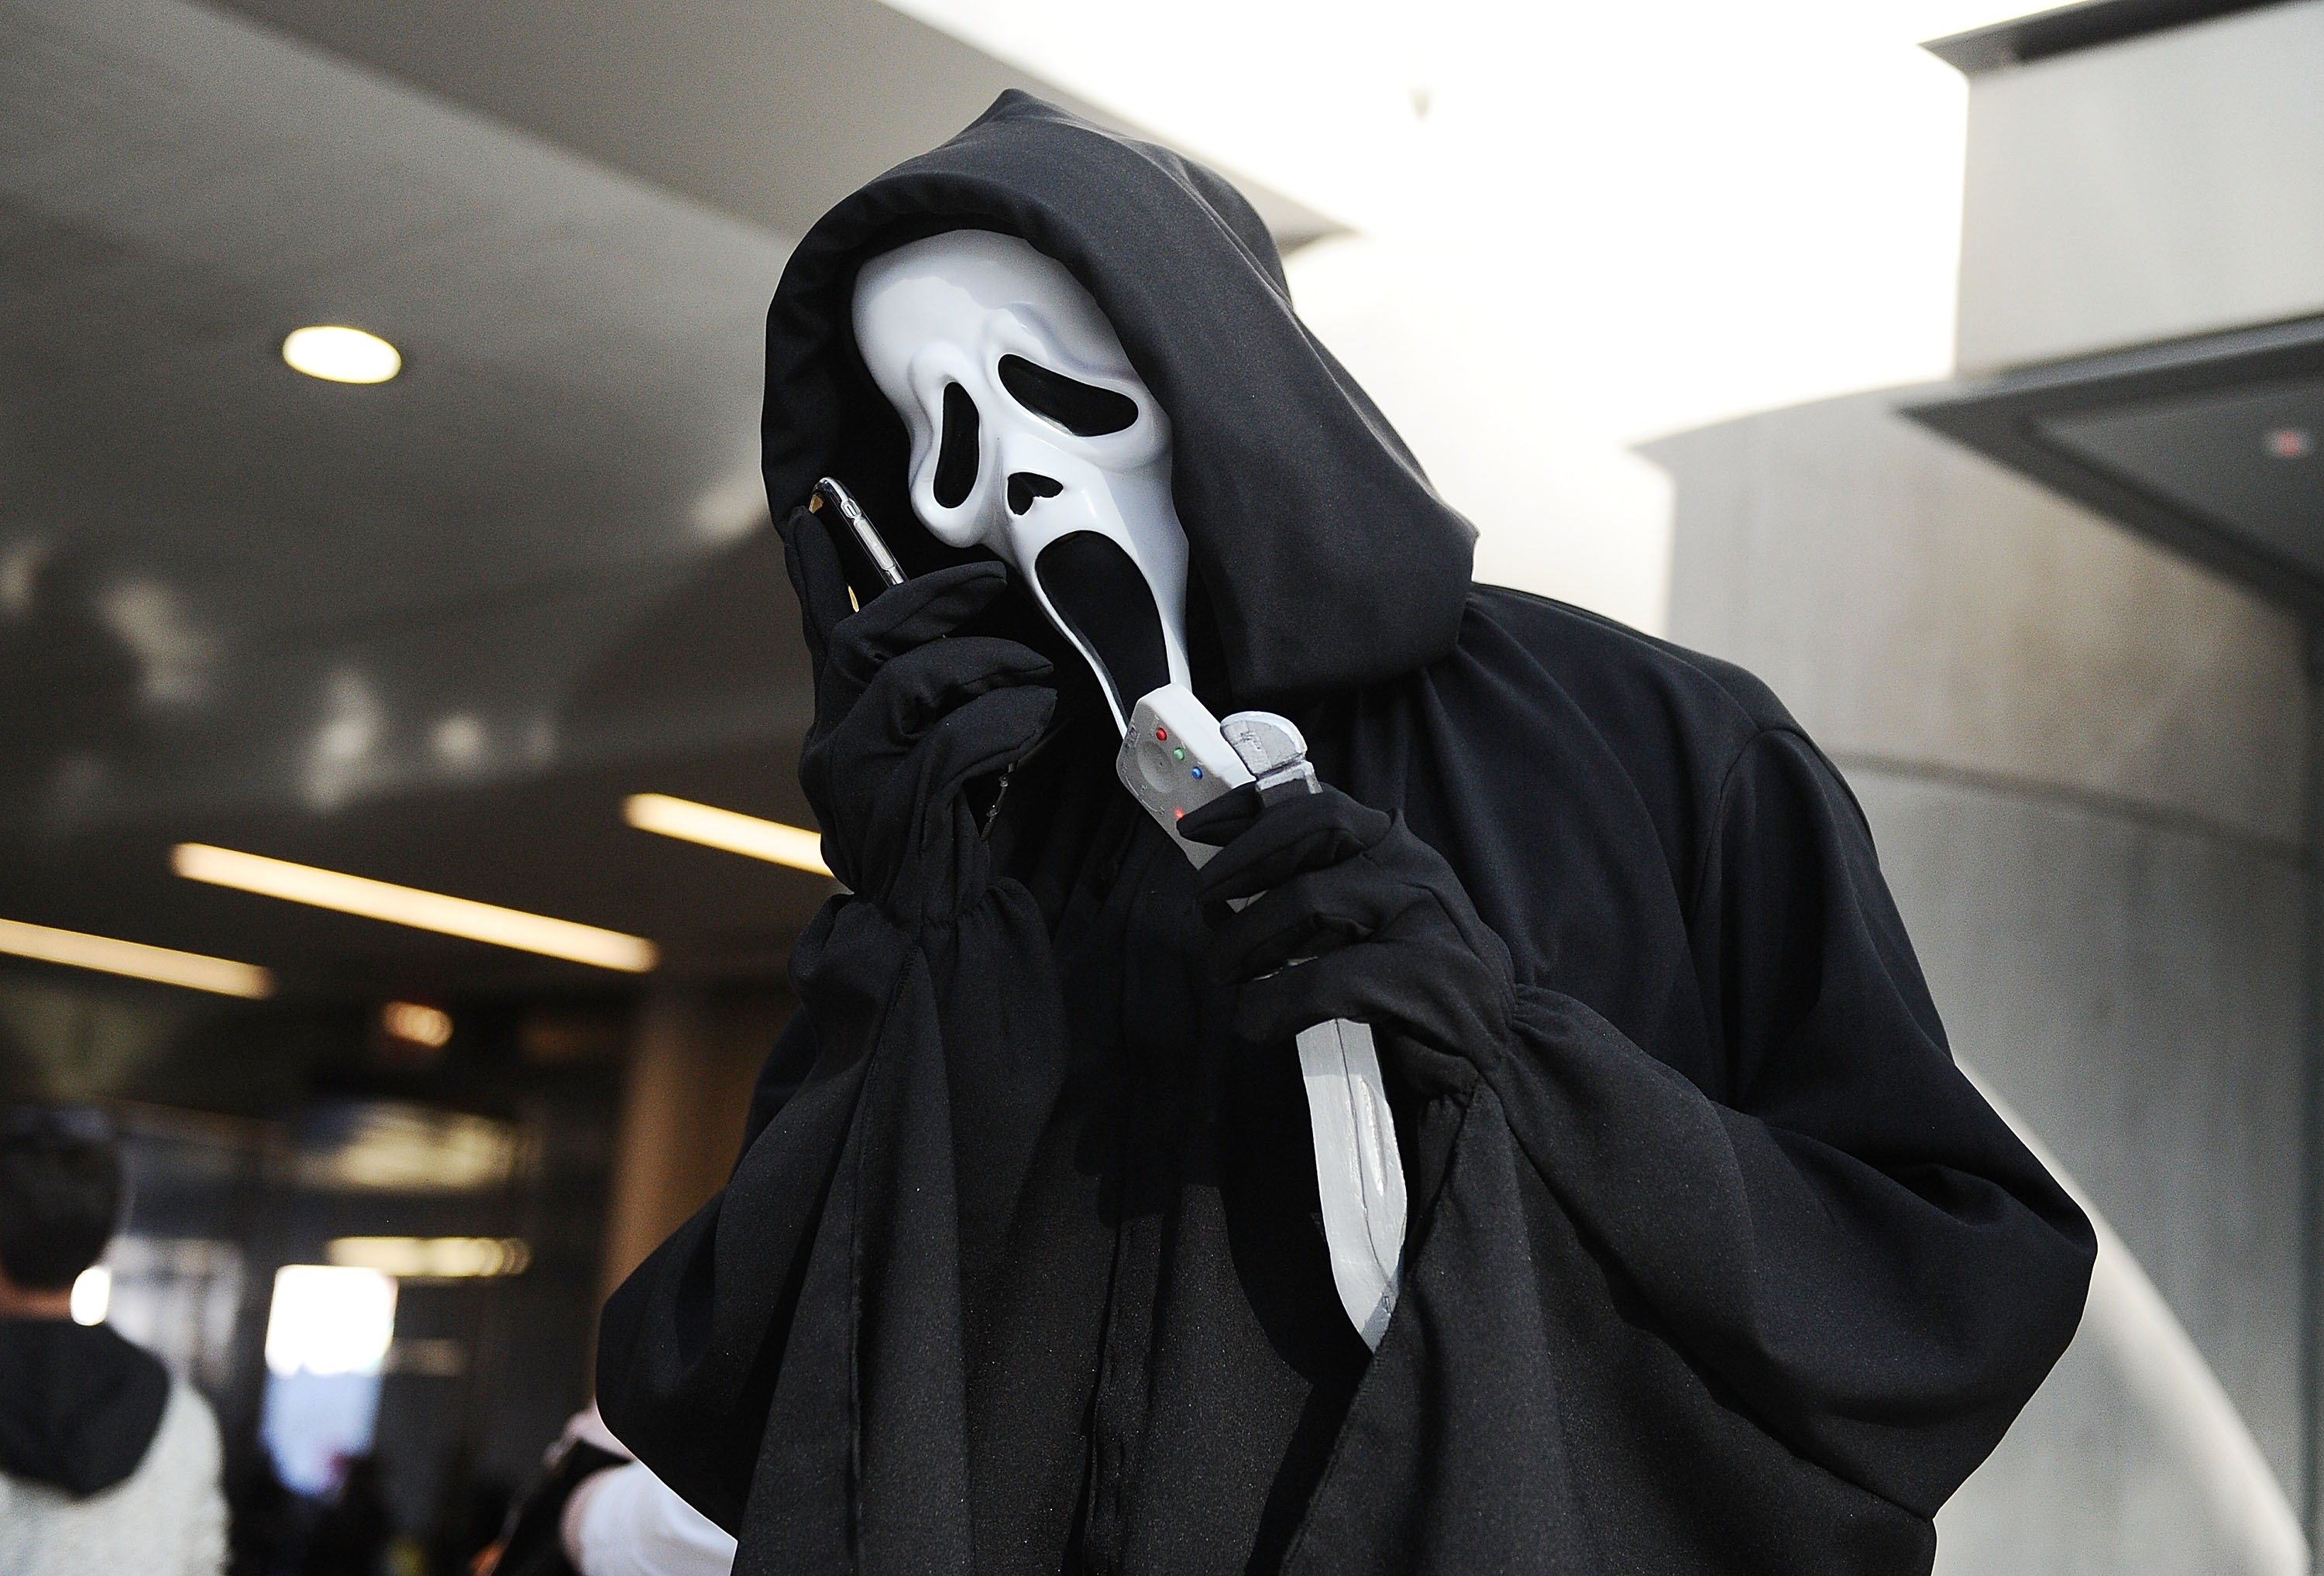 Ghostface posing at Comic Con talking on the phone from the Scream franchise, an ideal Halloween 2021 costume